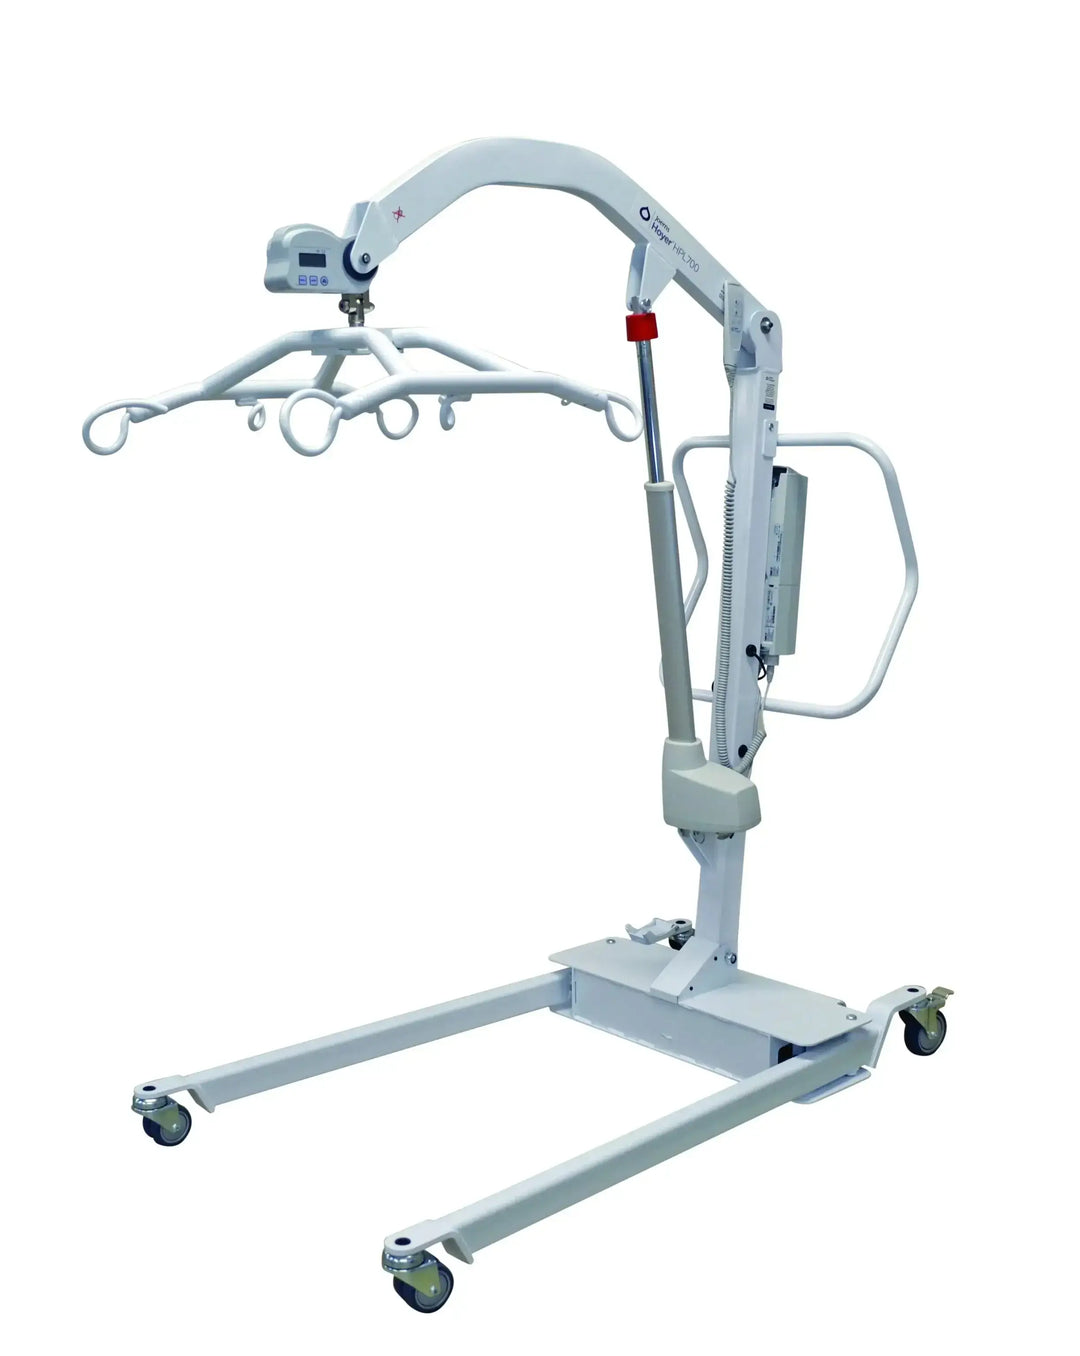 Hoyer HPL700 Bariatric Patient Lift - 700 lbs. Weight Capacity Patient Lifts Hoyer 